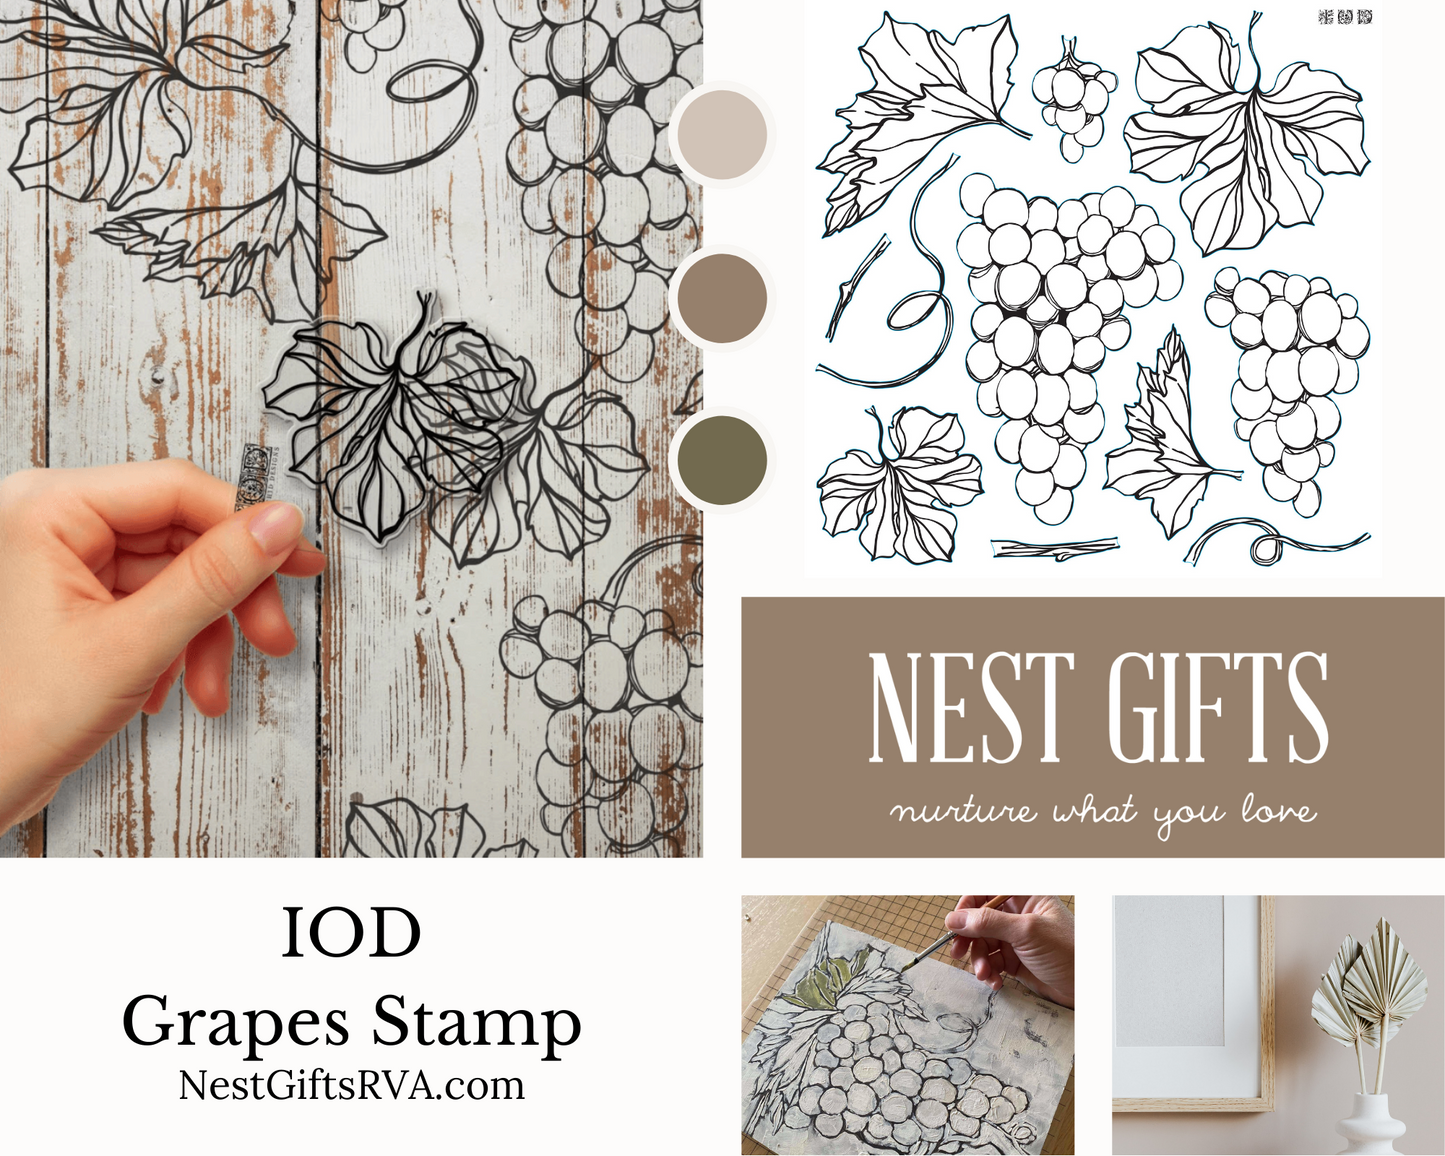 IOD Grapes Stamp by Iron Orchid Designs